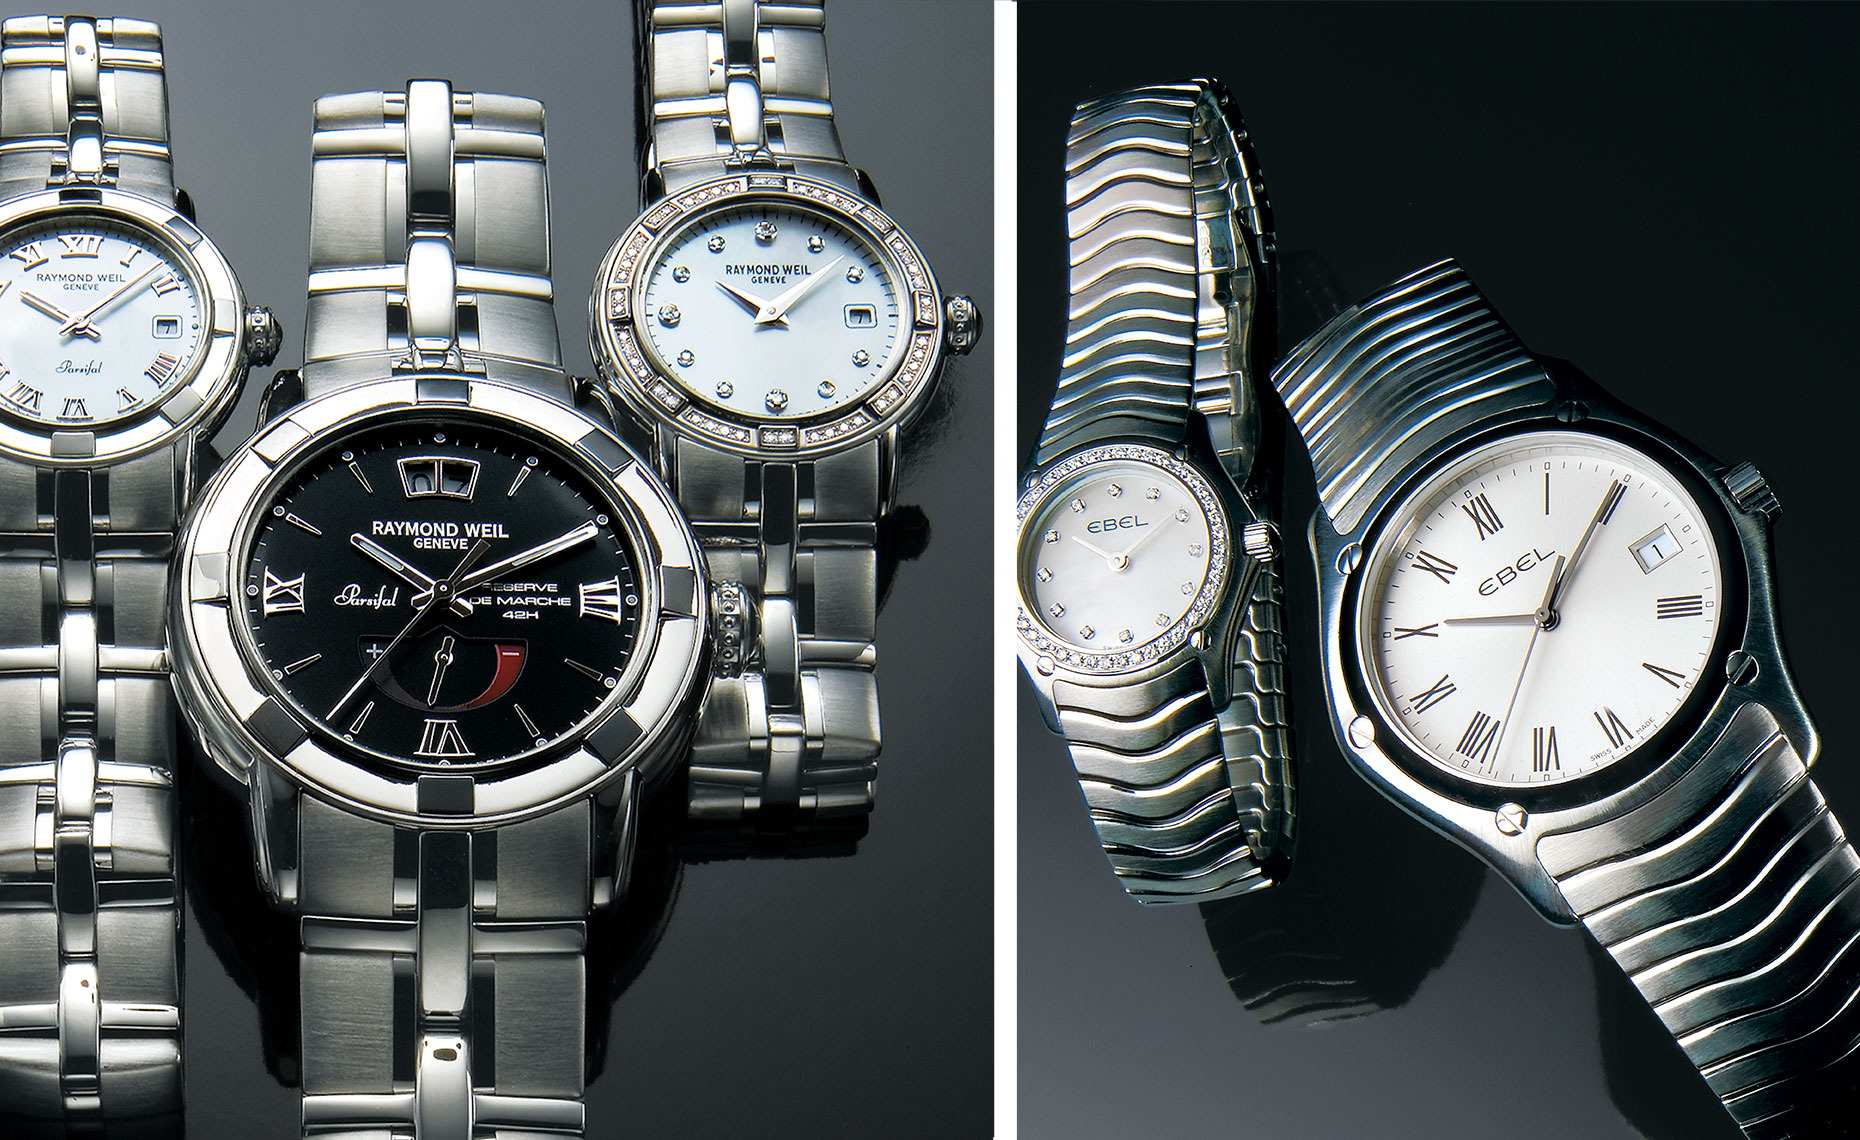 Classy watches ebel and raymond weil